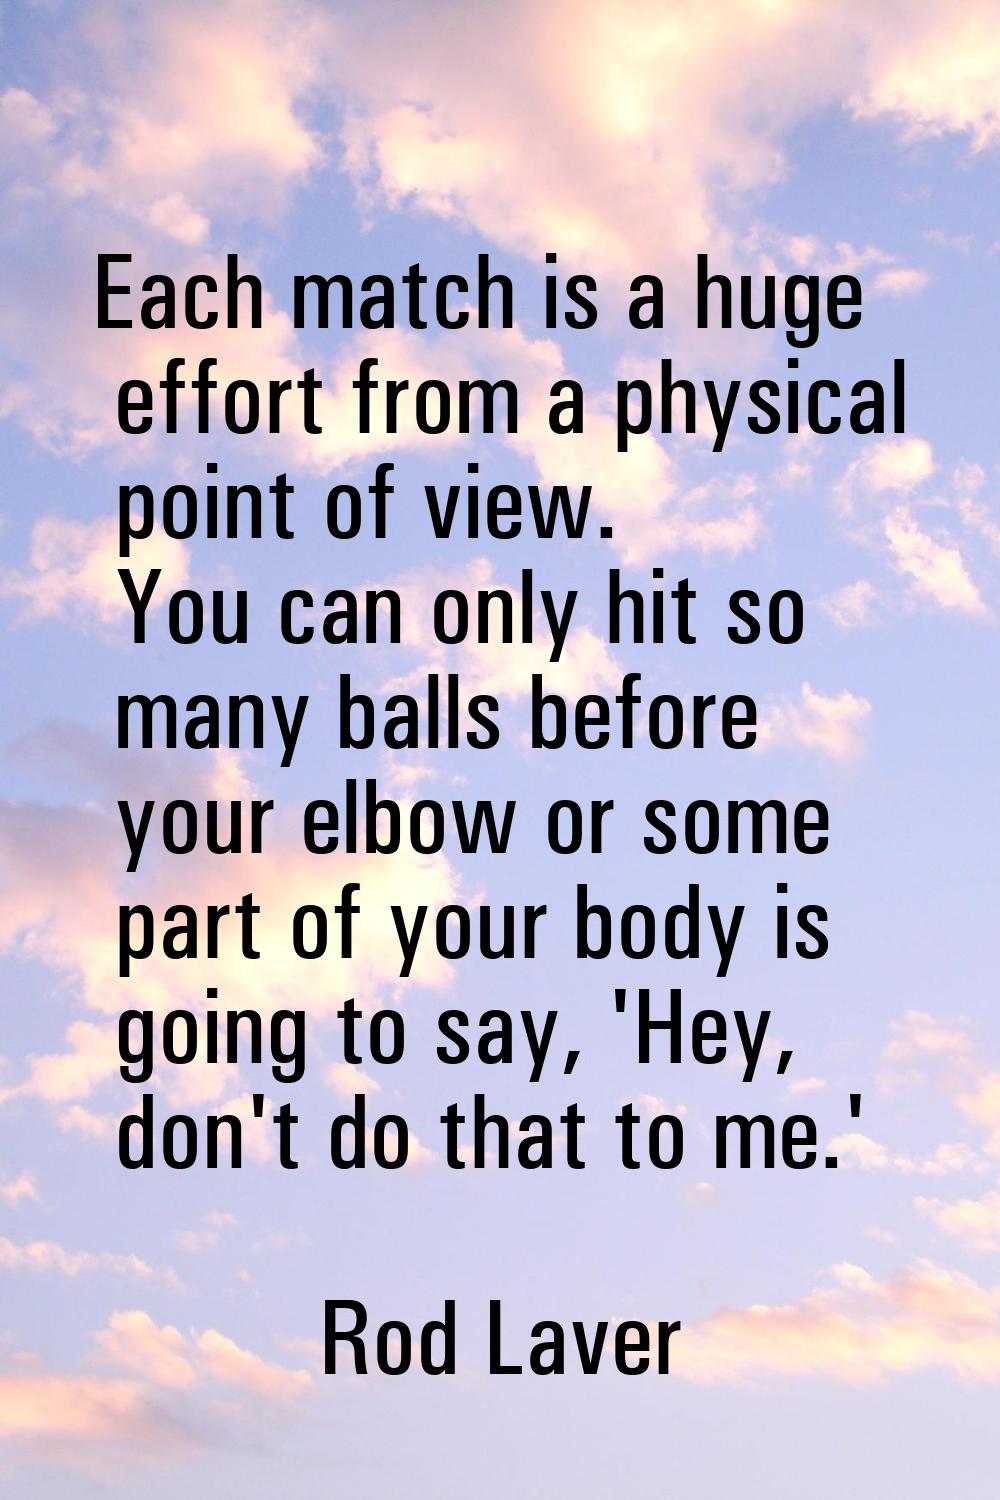 Each match is a huge effort from a physical point of view. You can only hit so many balls before yo